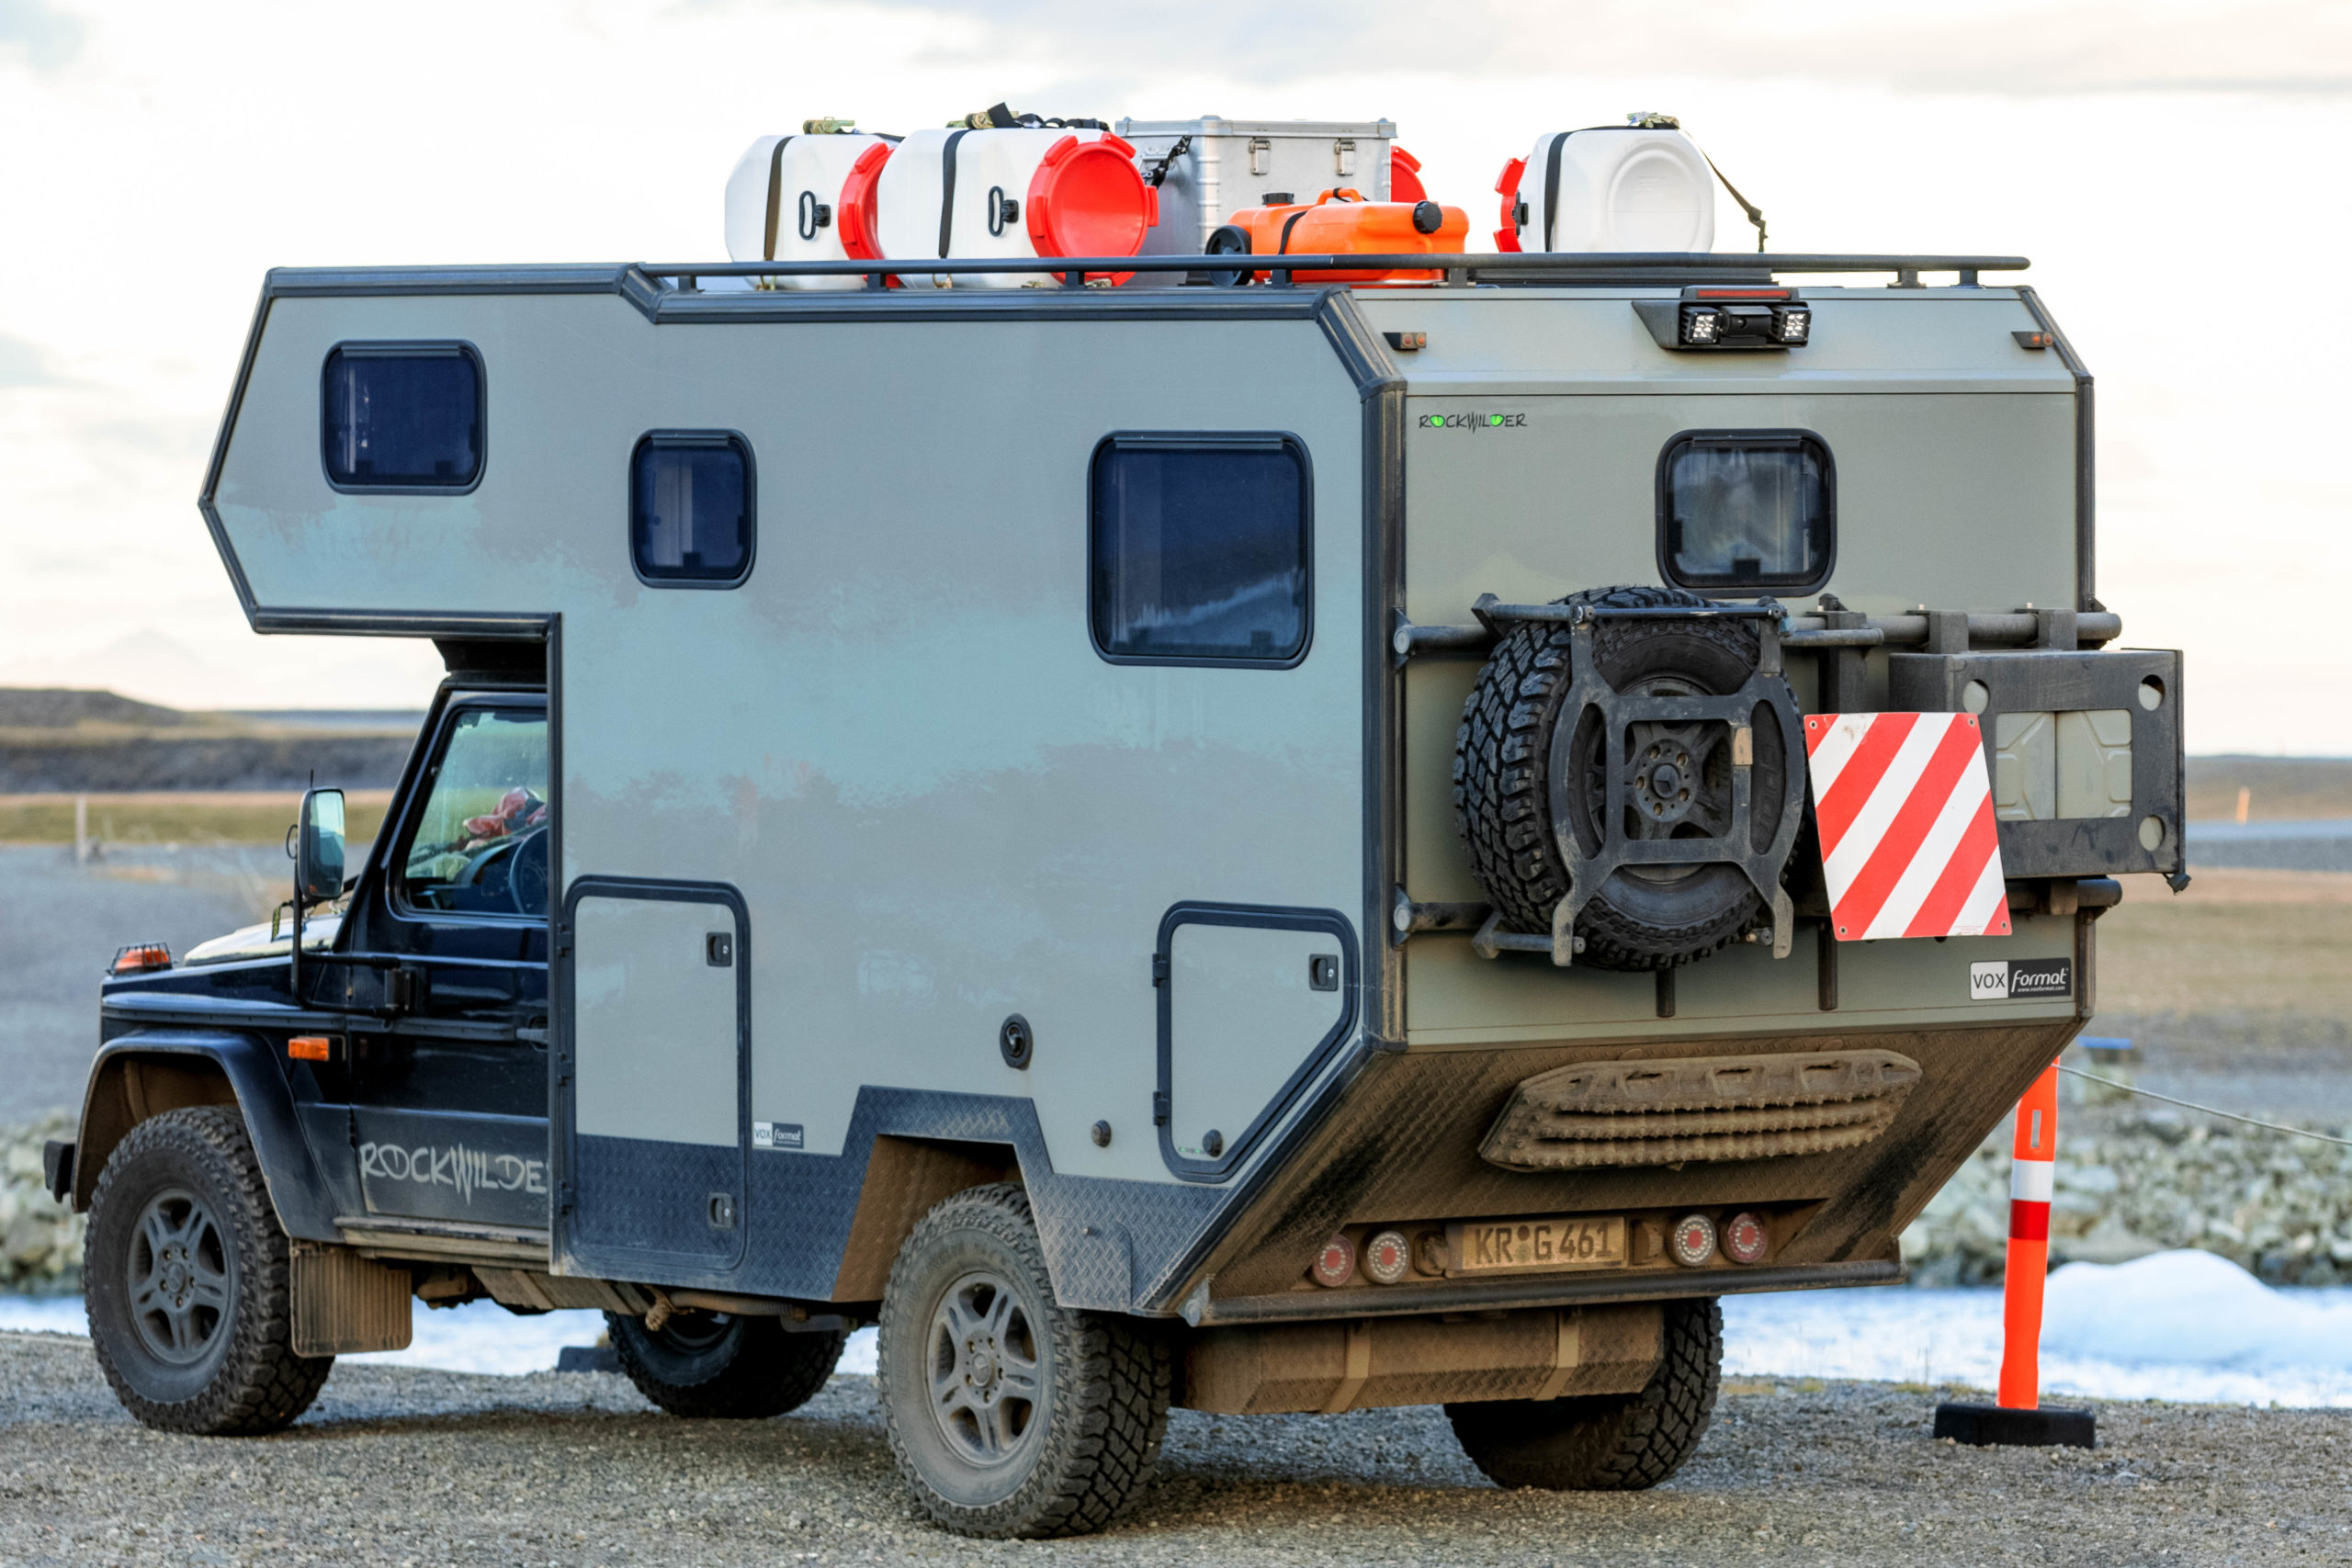 A heavy duty vehicle in Iceland.